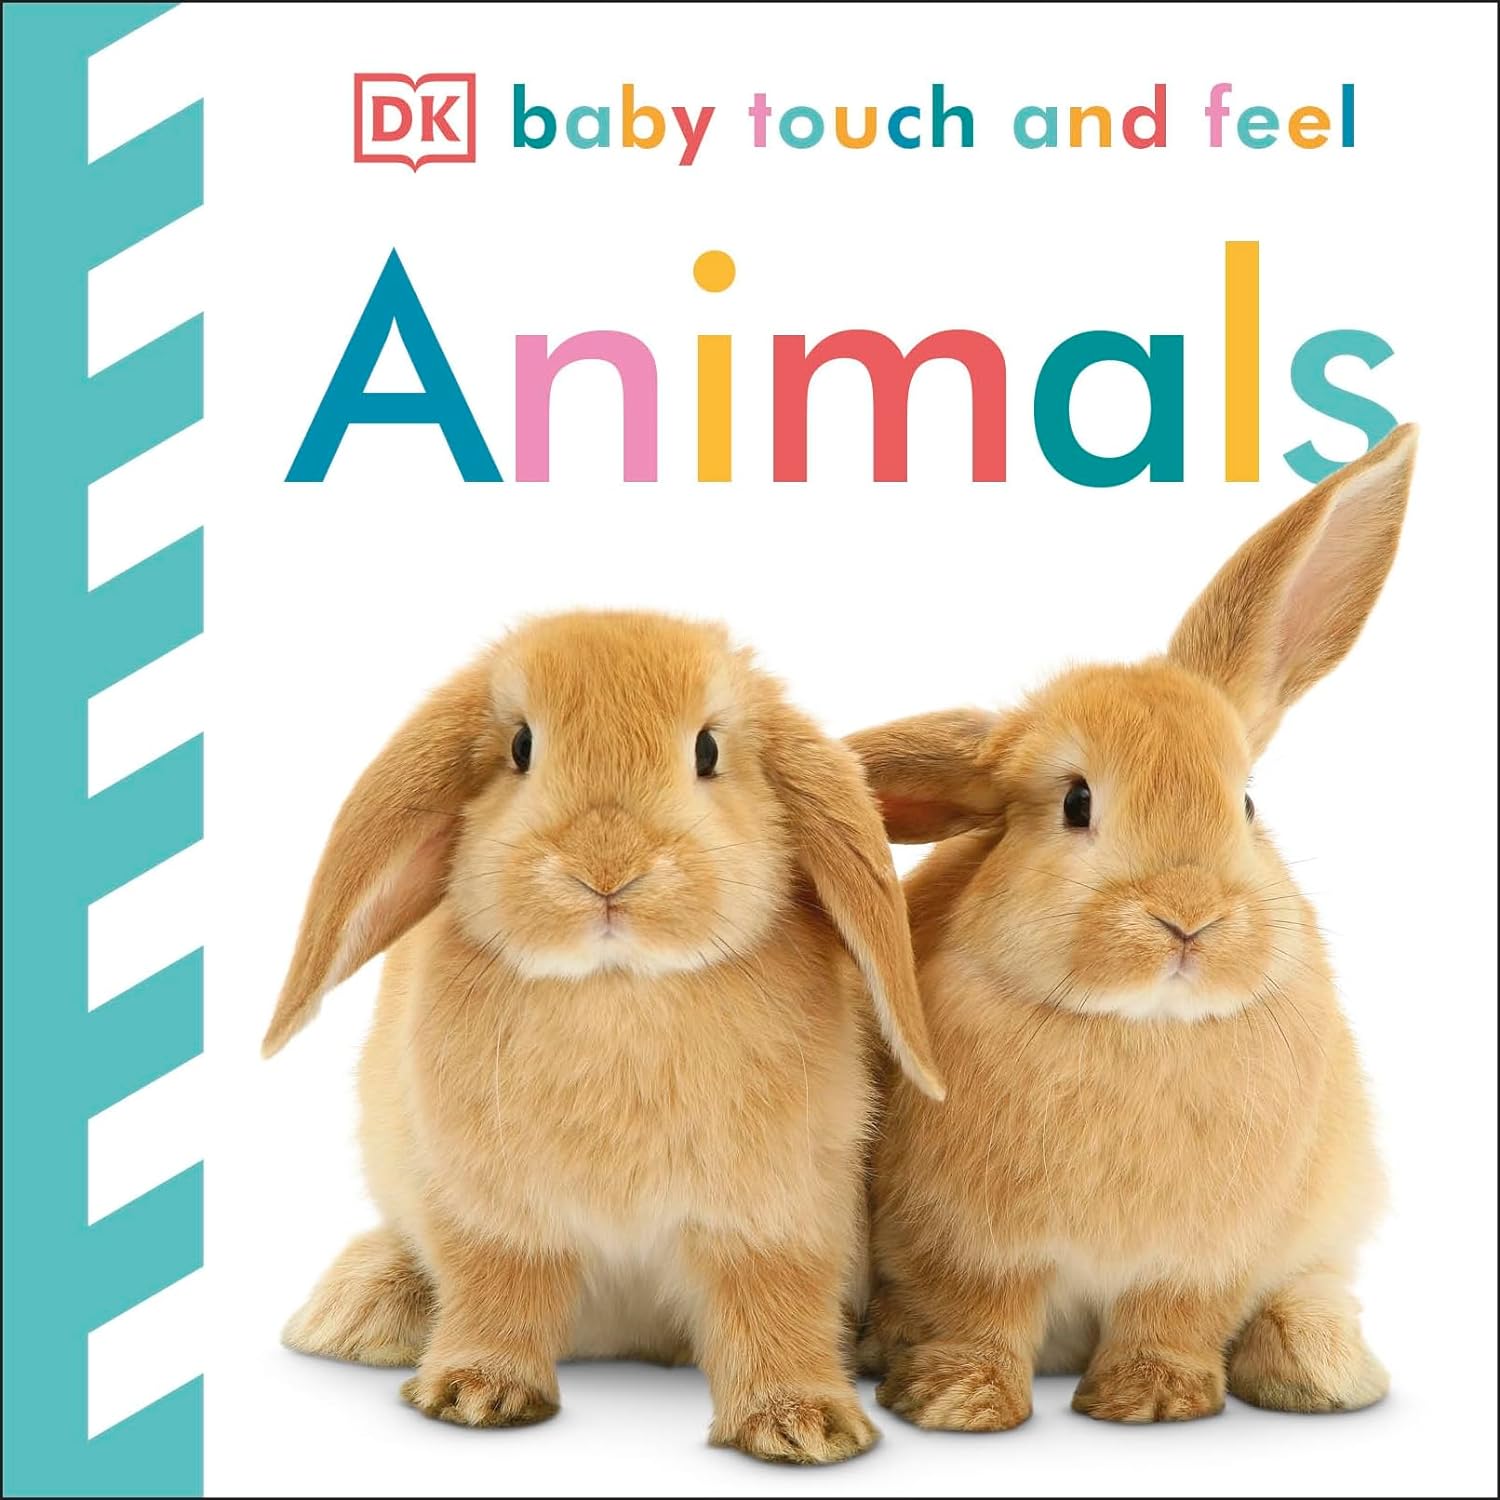 $3.22: Baby Touch and Feel: Animals by DK (Children's Board Book) Amazon